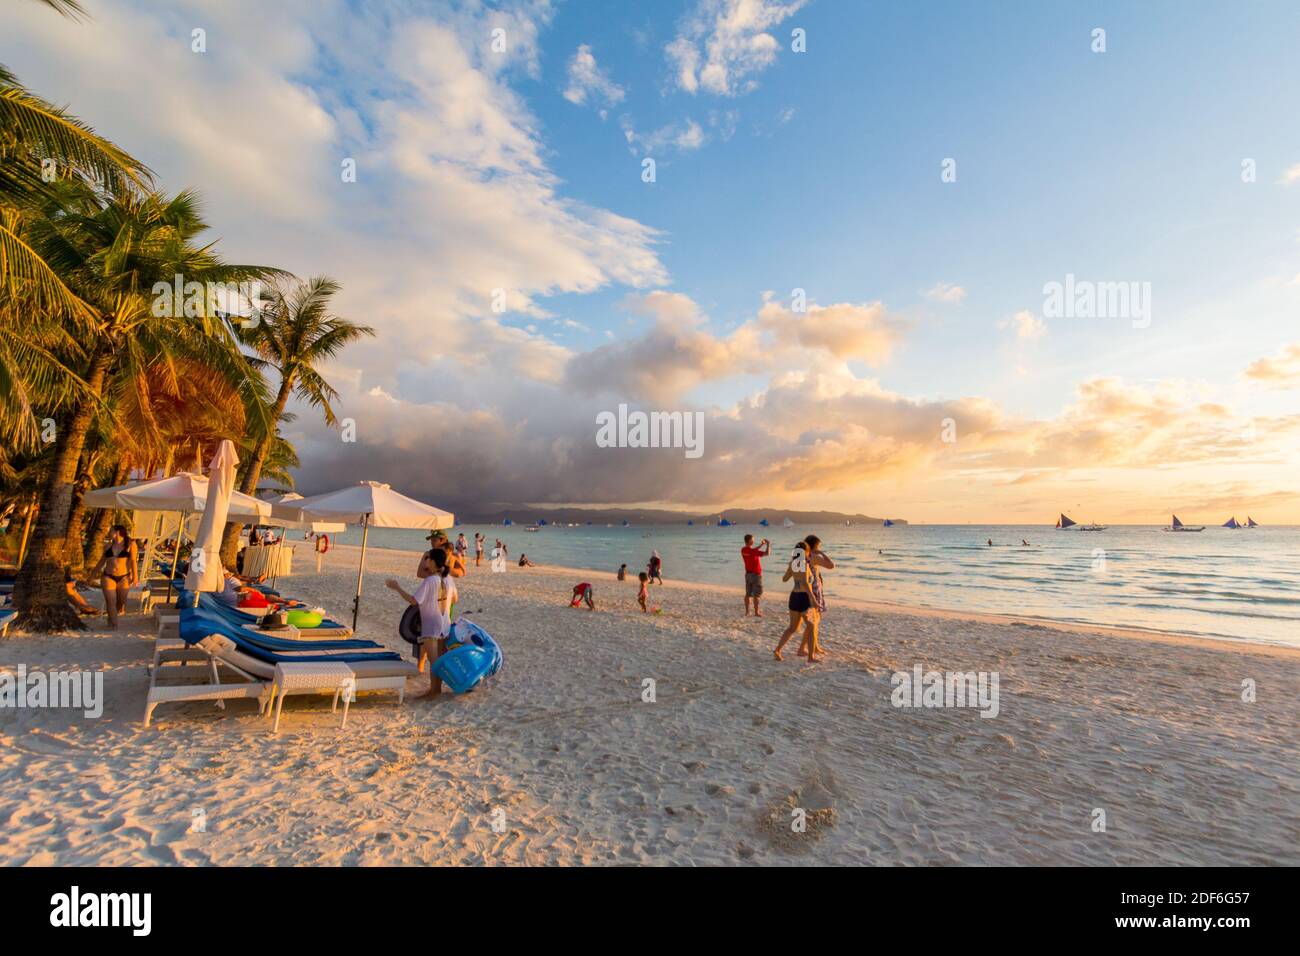 Late Afternoon Along White Beach In Boracay Island In The Philippines